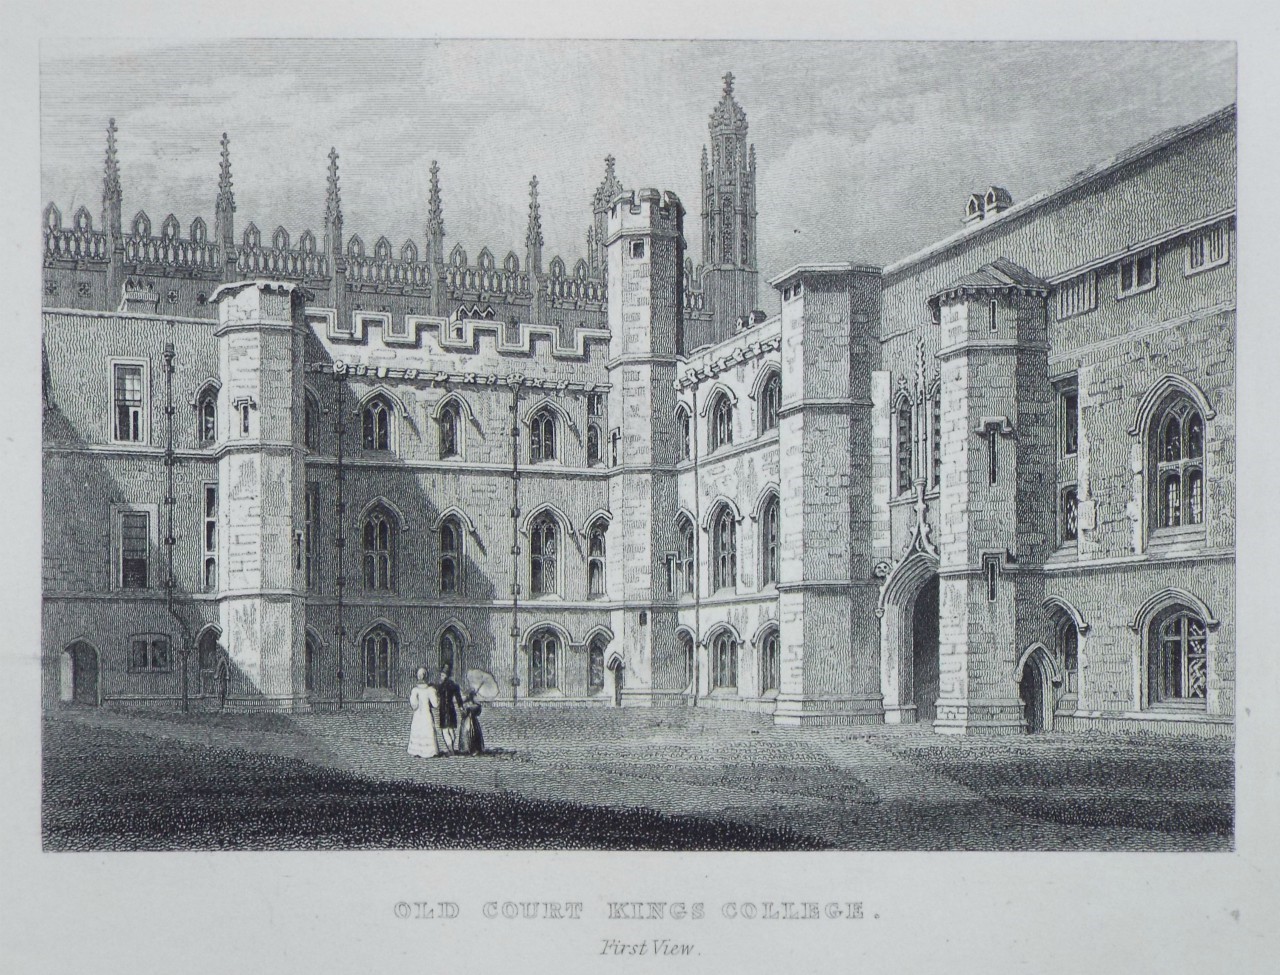 Print - Old Court Kings College. First View.